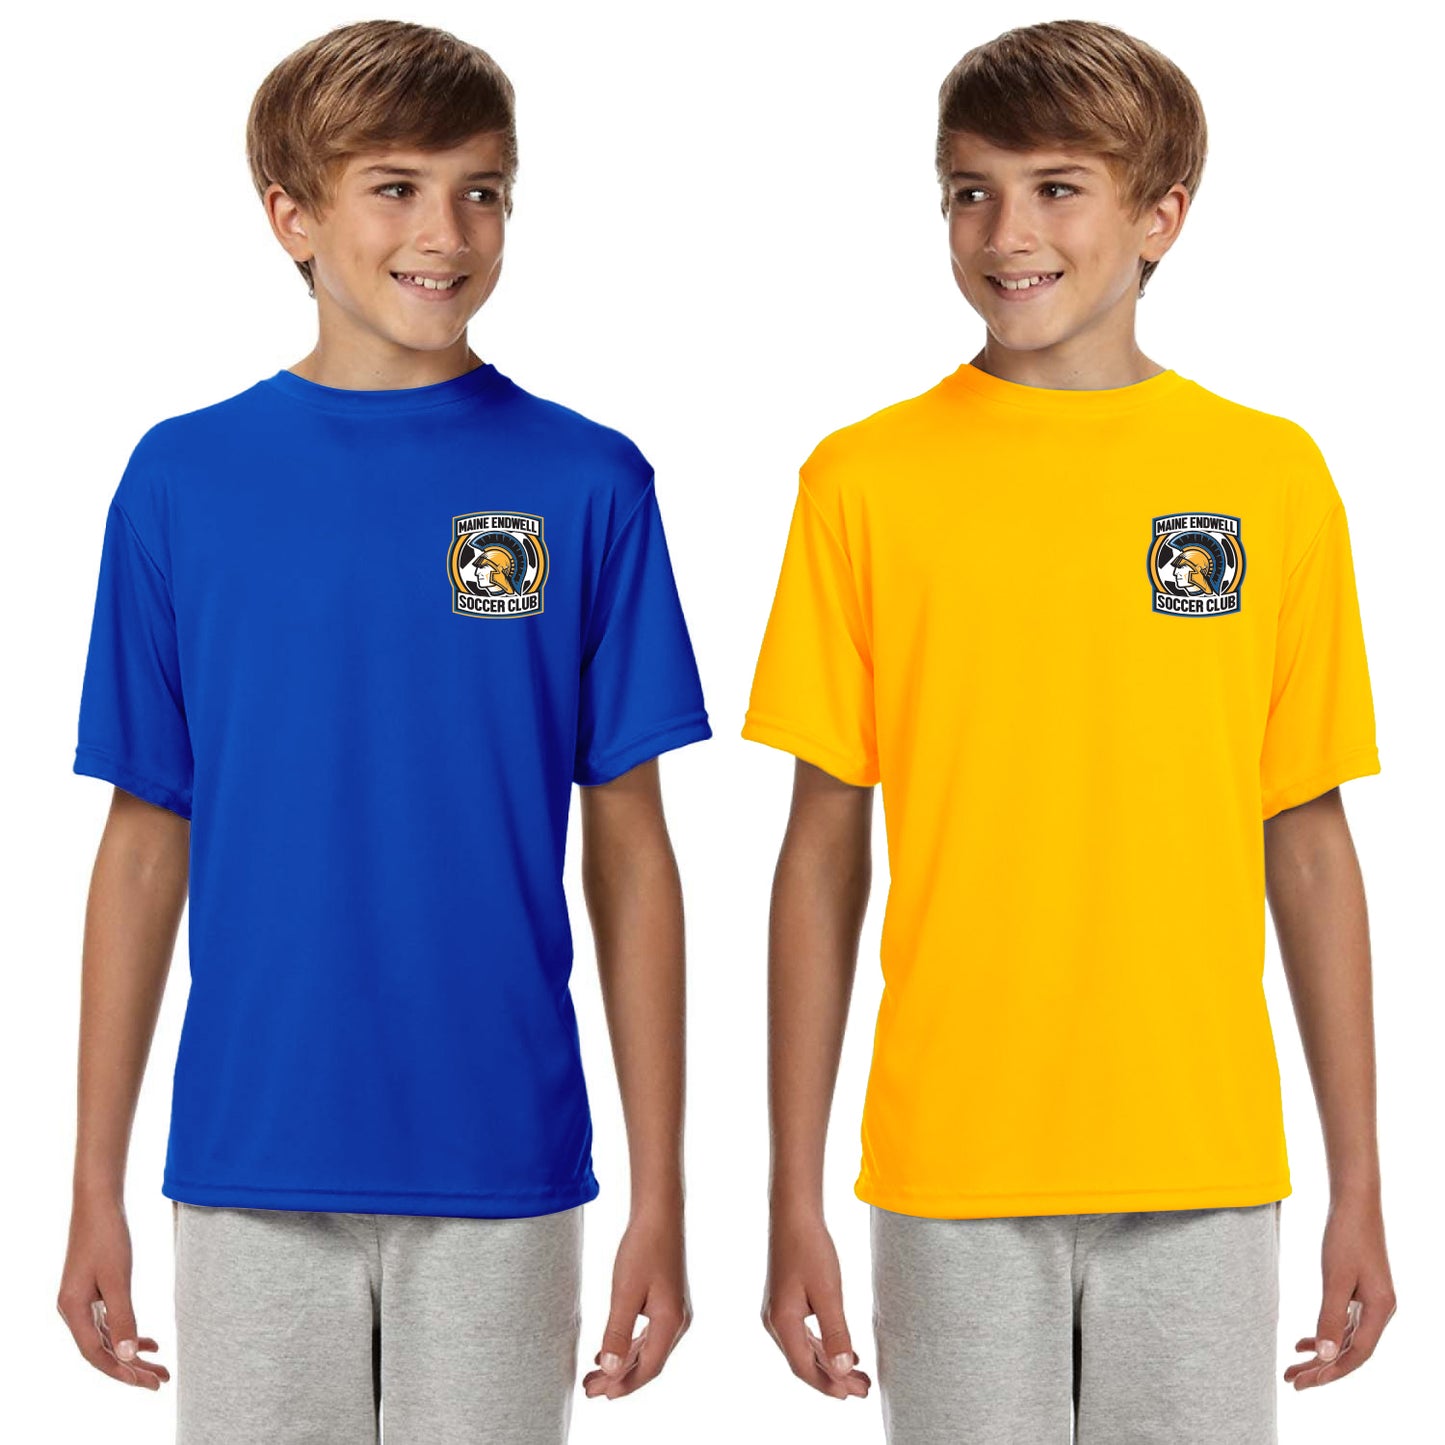 Maine Endwell Soccer Club Youth Performance T-Shirt